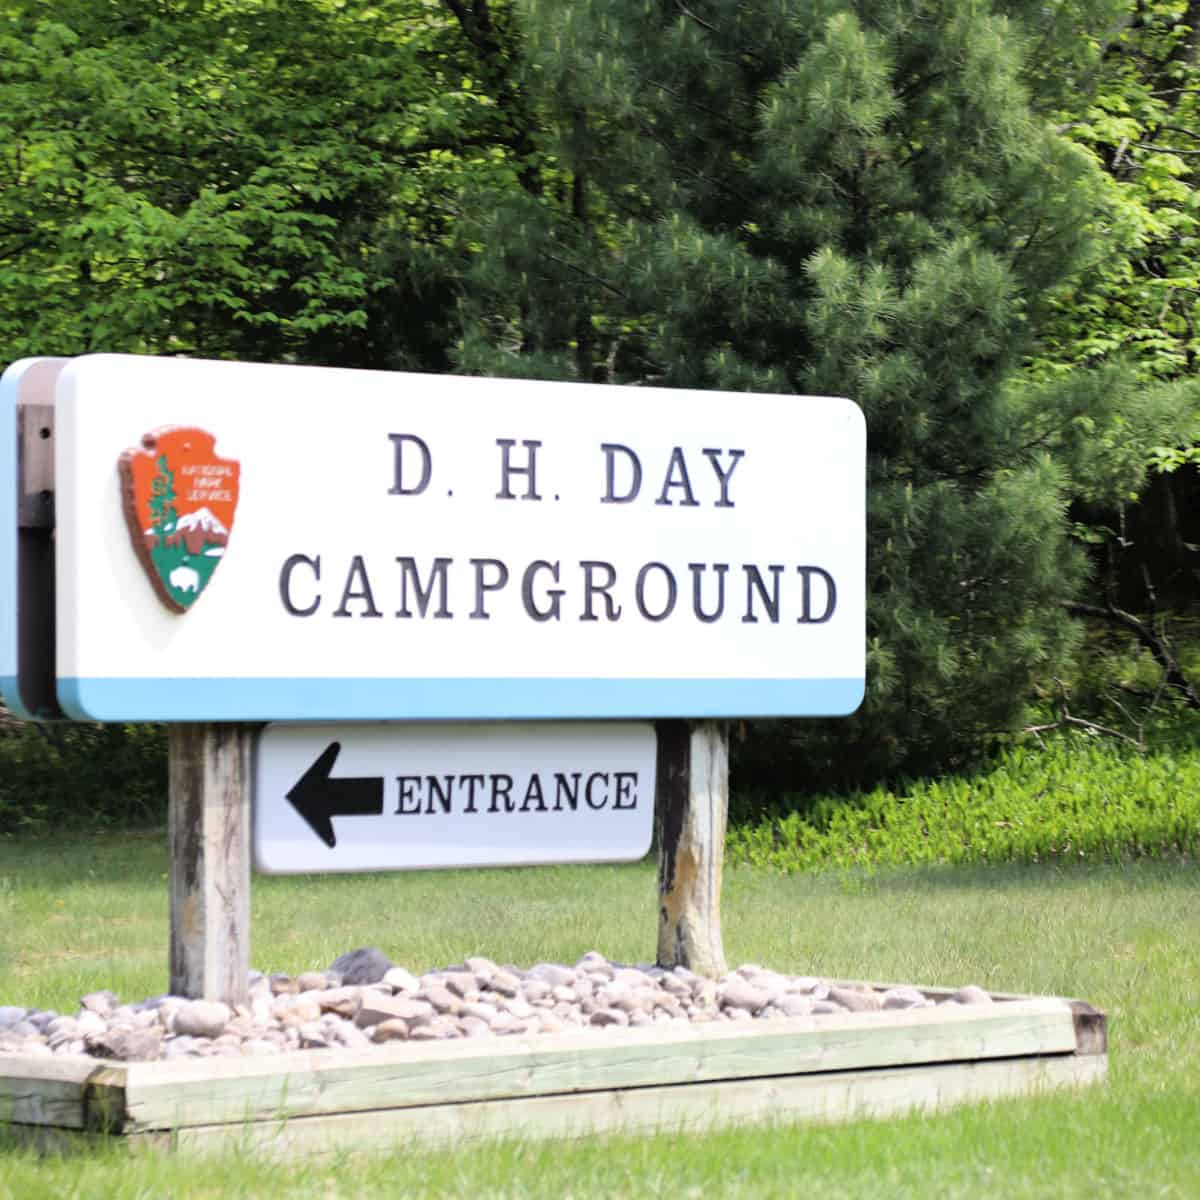 D.H. Day Campground entrance sign for Sleeping Bear Dunes National Lakeshore